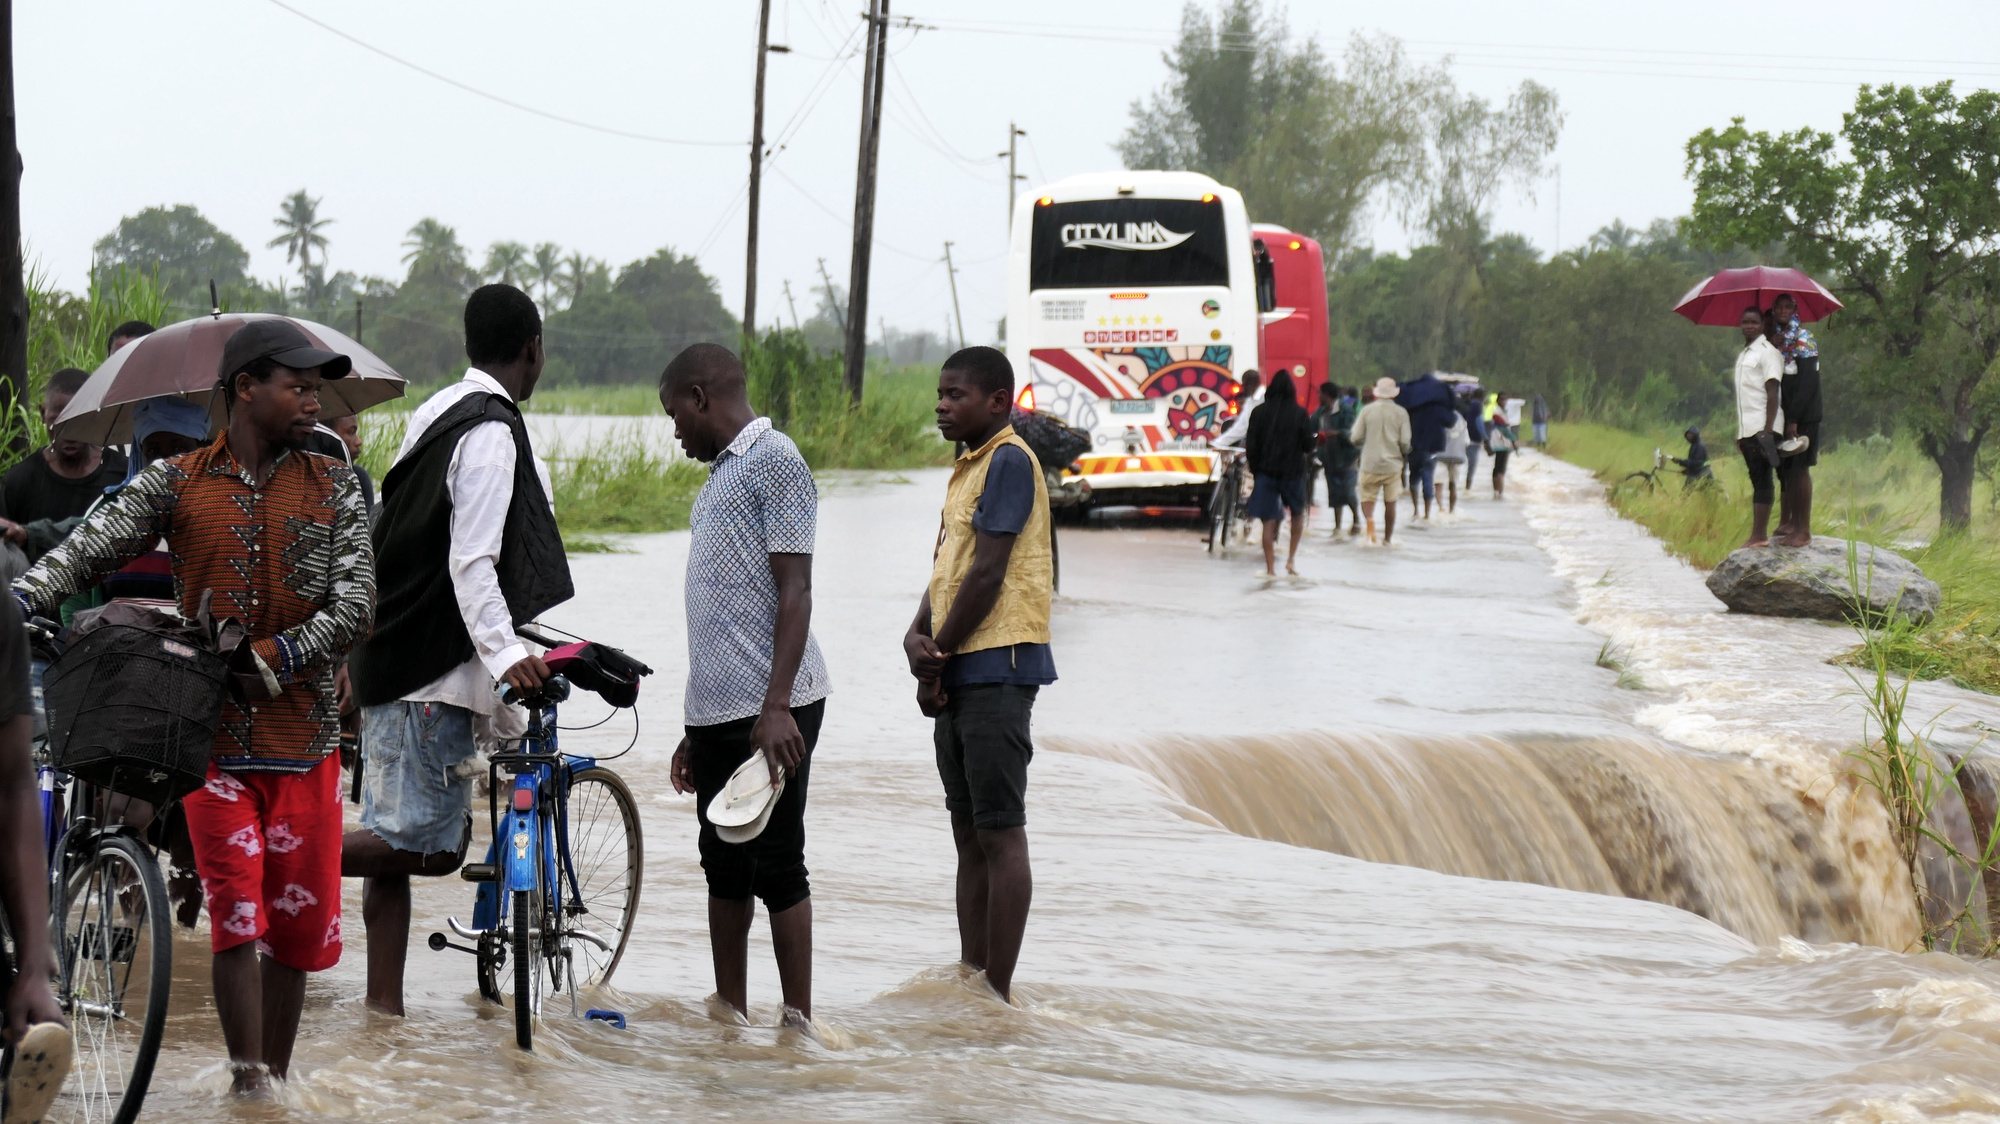 People walk on a road flooded by the River Bilila, Maputo, Mozambique, 14 March 2023. This is one of the longest lasting storms ever, after it formed at the beginning of February in the Asian seas, crossing the entire Indian Ocean to the east African coast. Until now 10 people have been killed by the storm accordind to official data. ANDRE CATUEIRA/LUSA